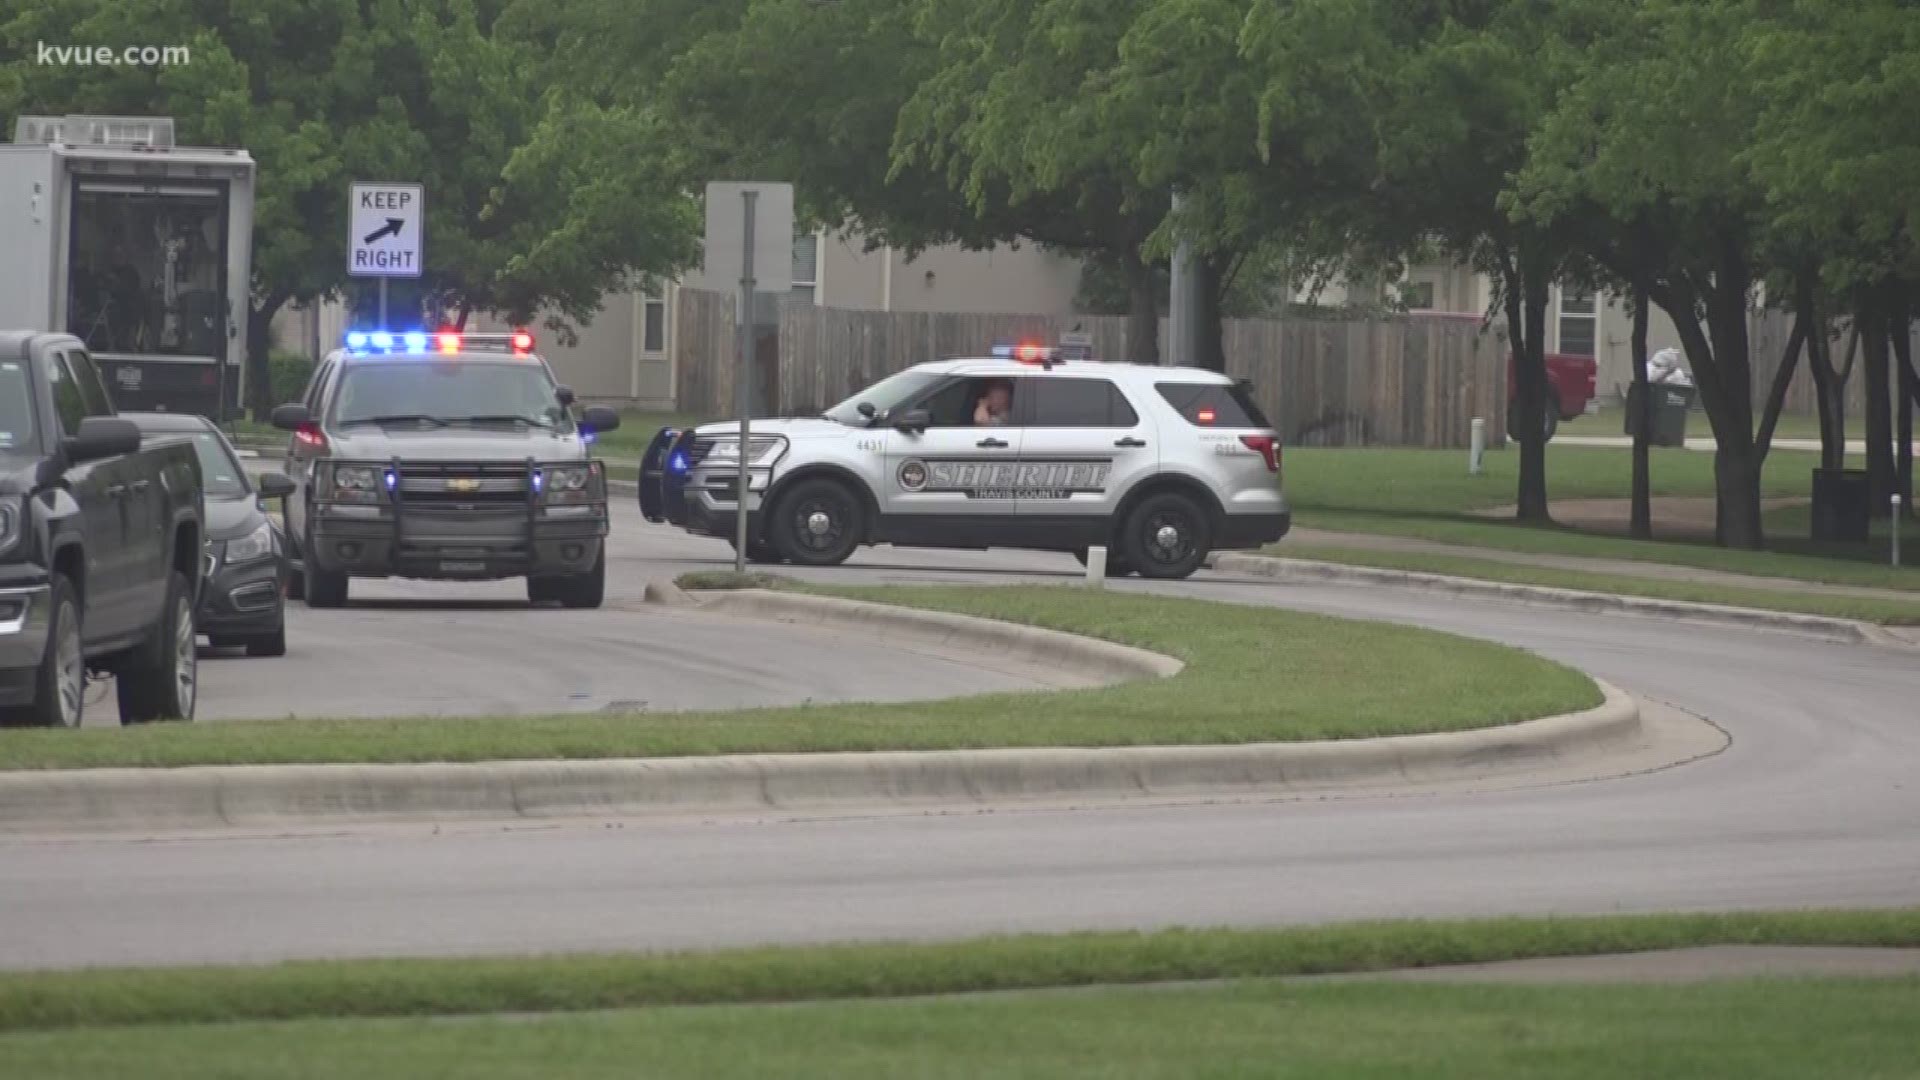 A man is in custody after a standoff with police.